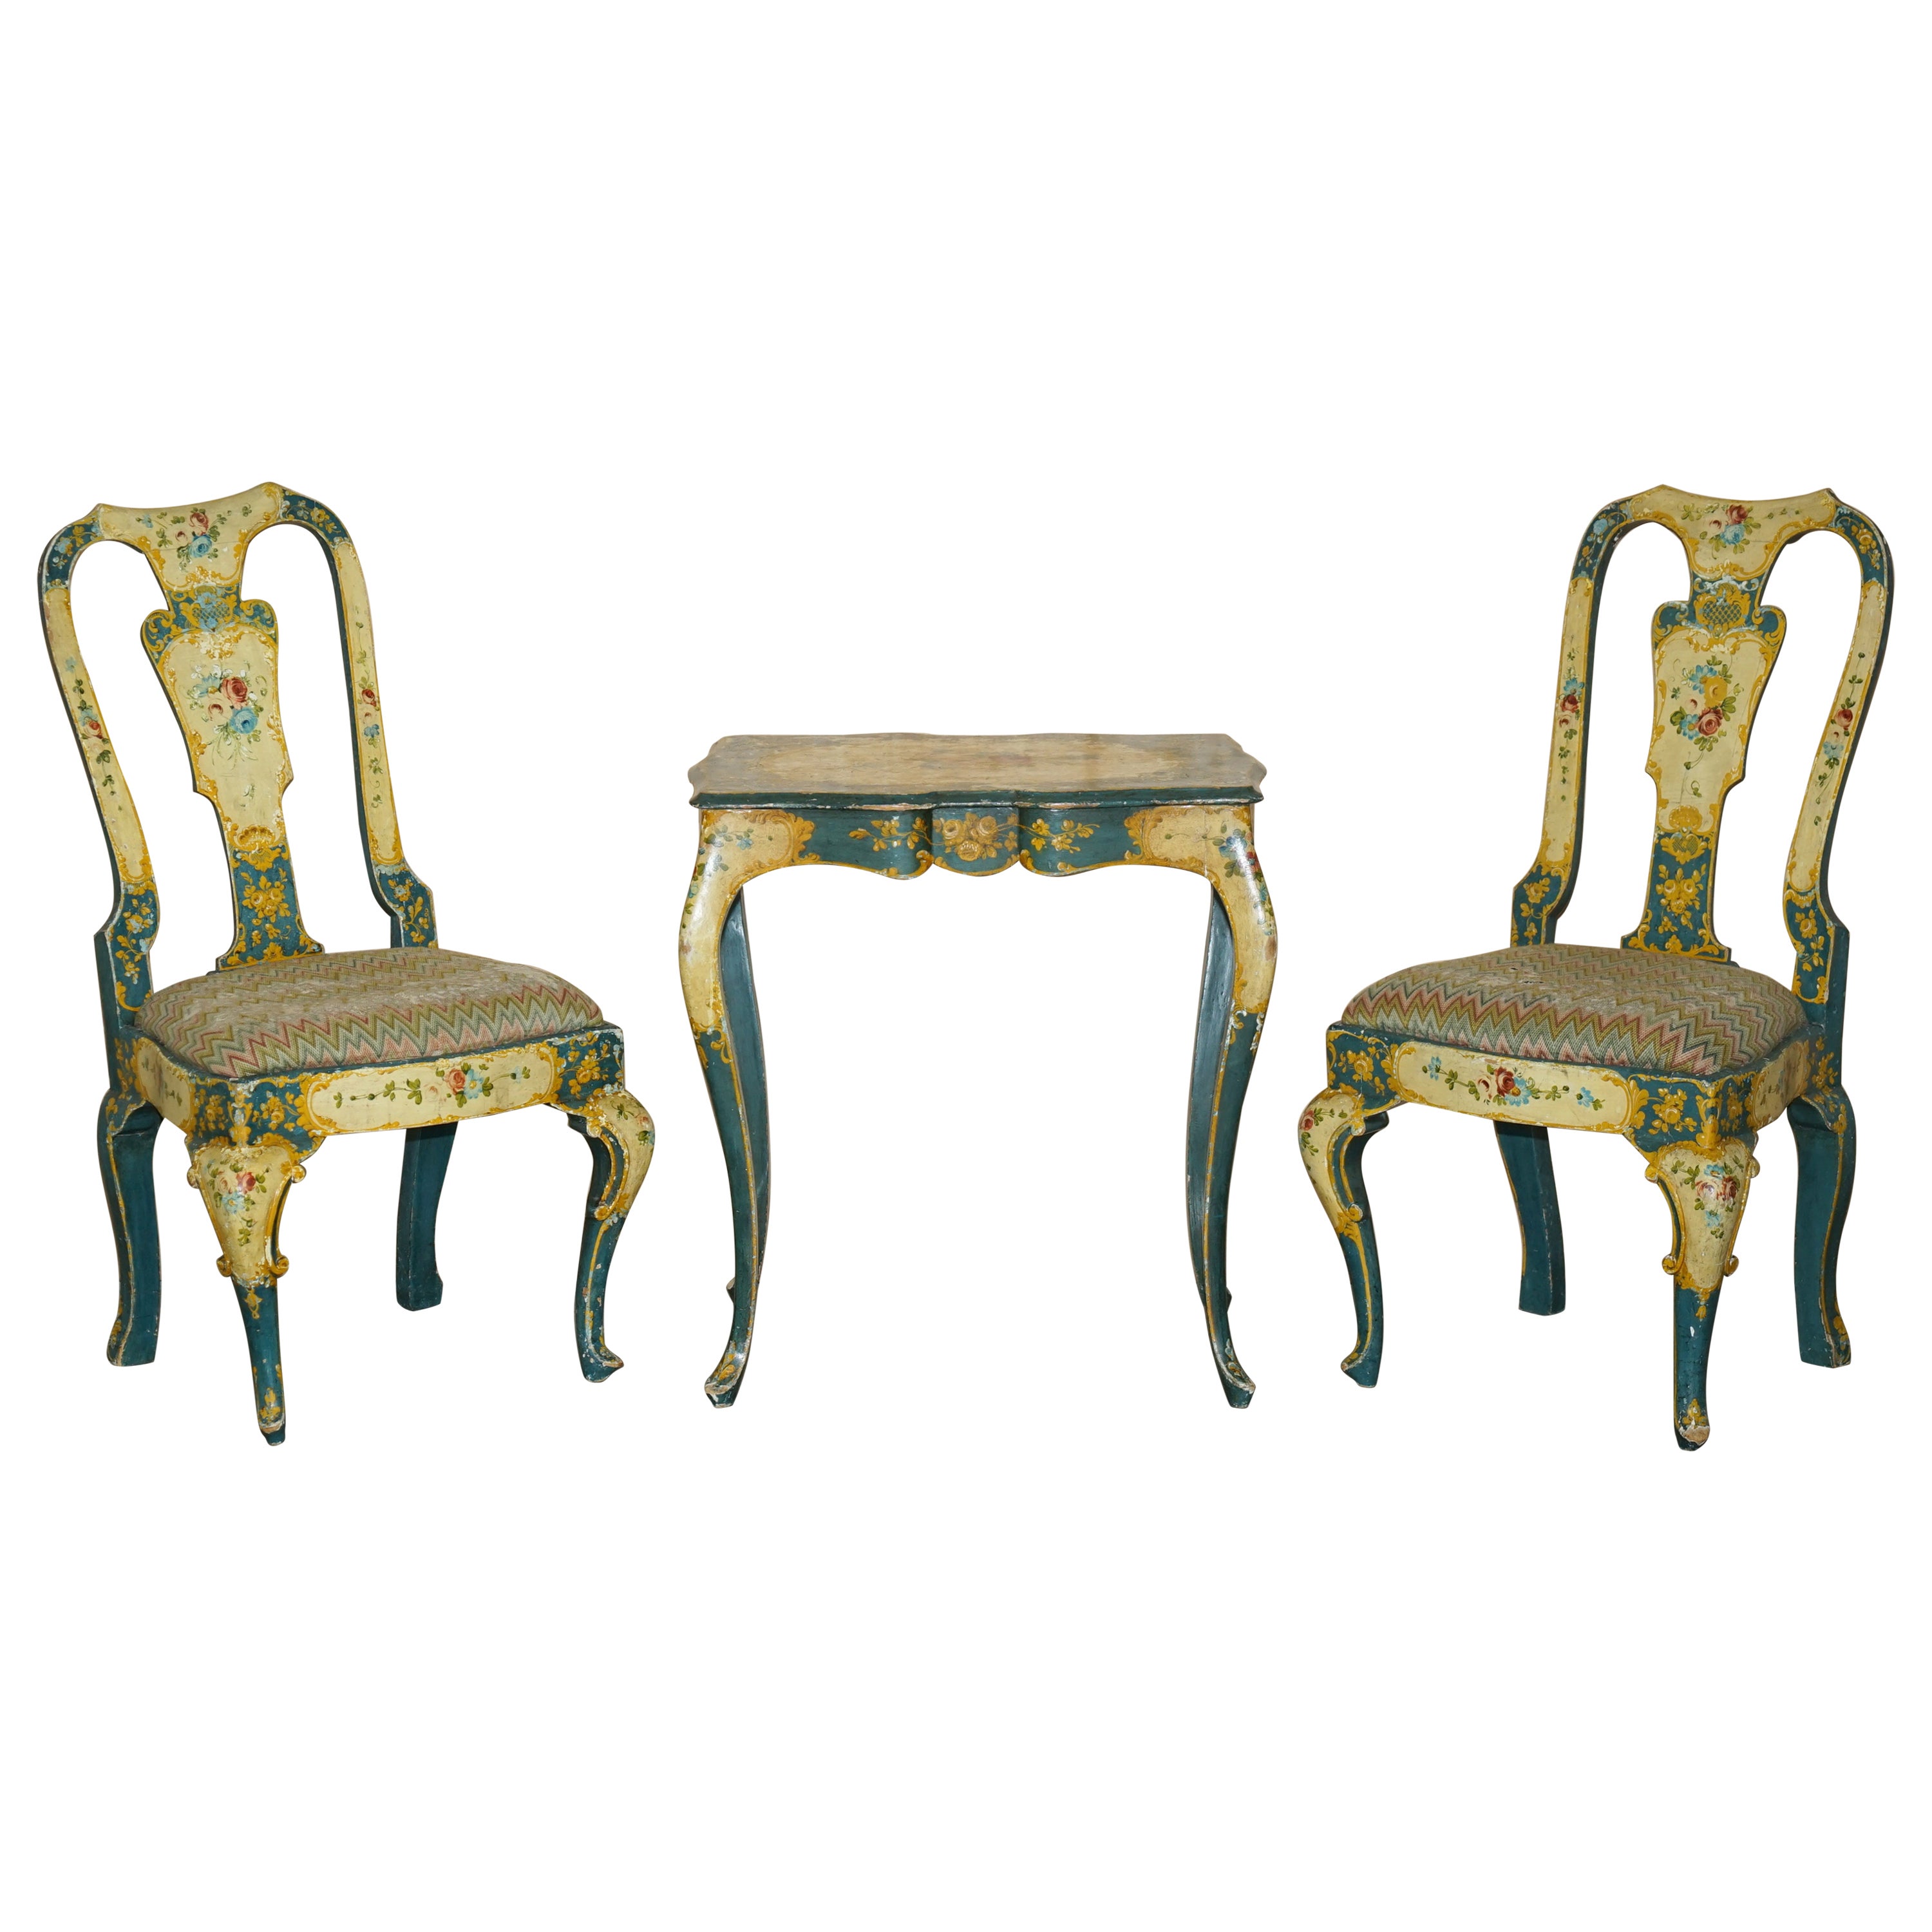 Pair of Antique Regency Chairs & Matching Table from Glenalmond Estate Scotland For Sale